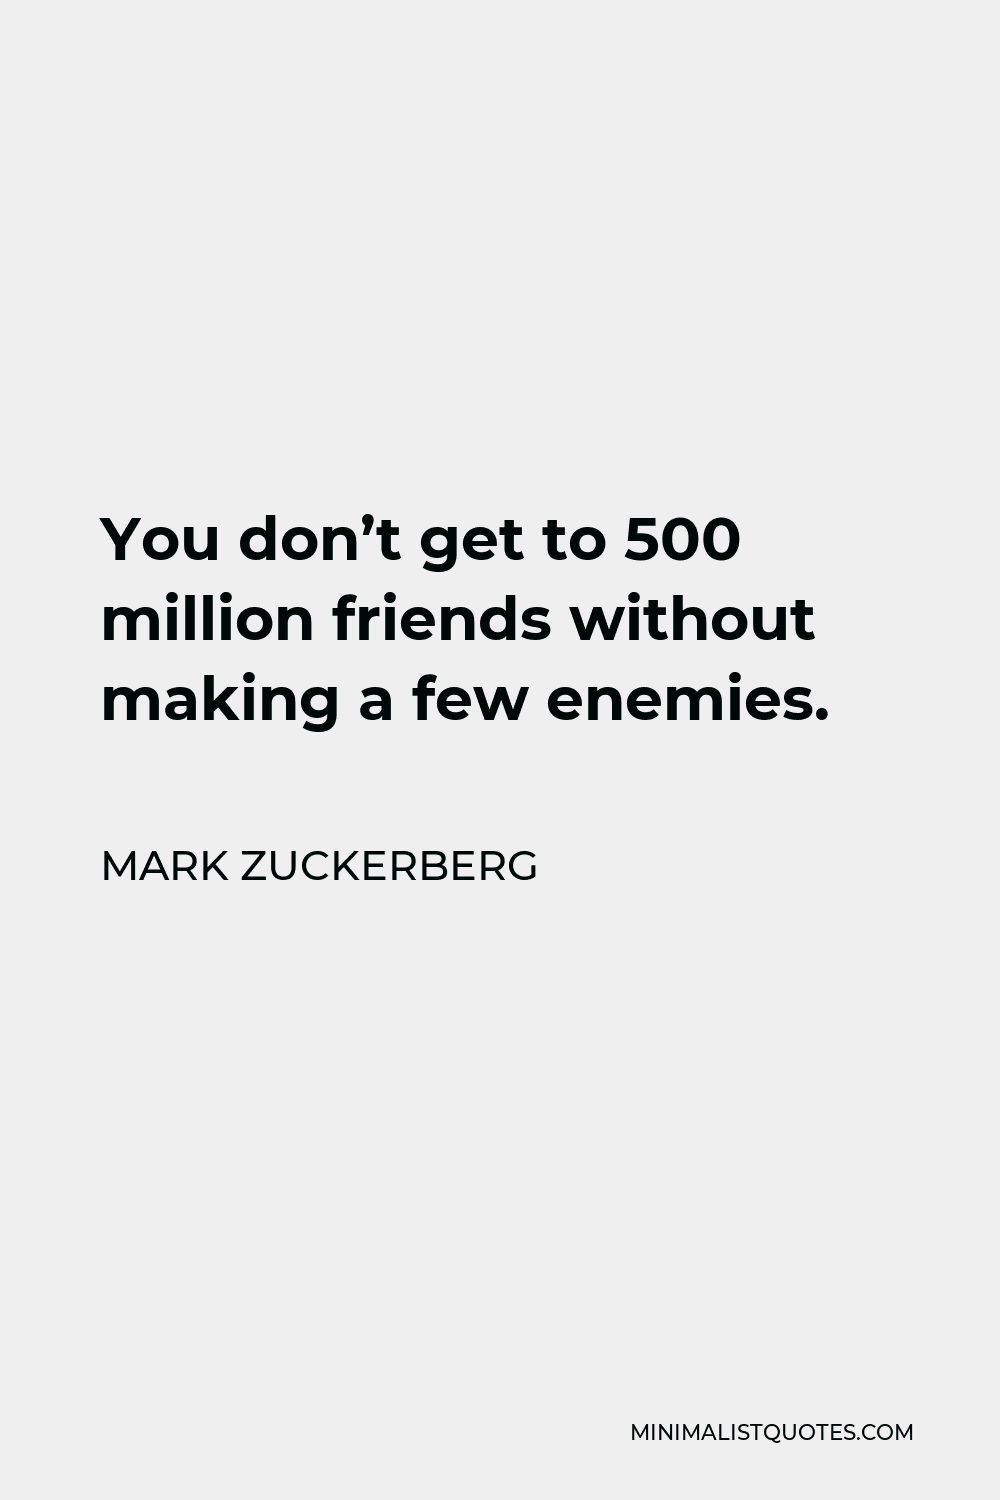 Mark Zuckerberg Quote - You don’t get to 500 million friends without making a few enemies.